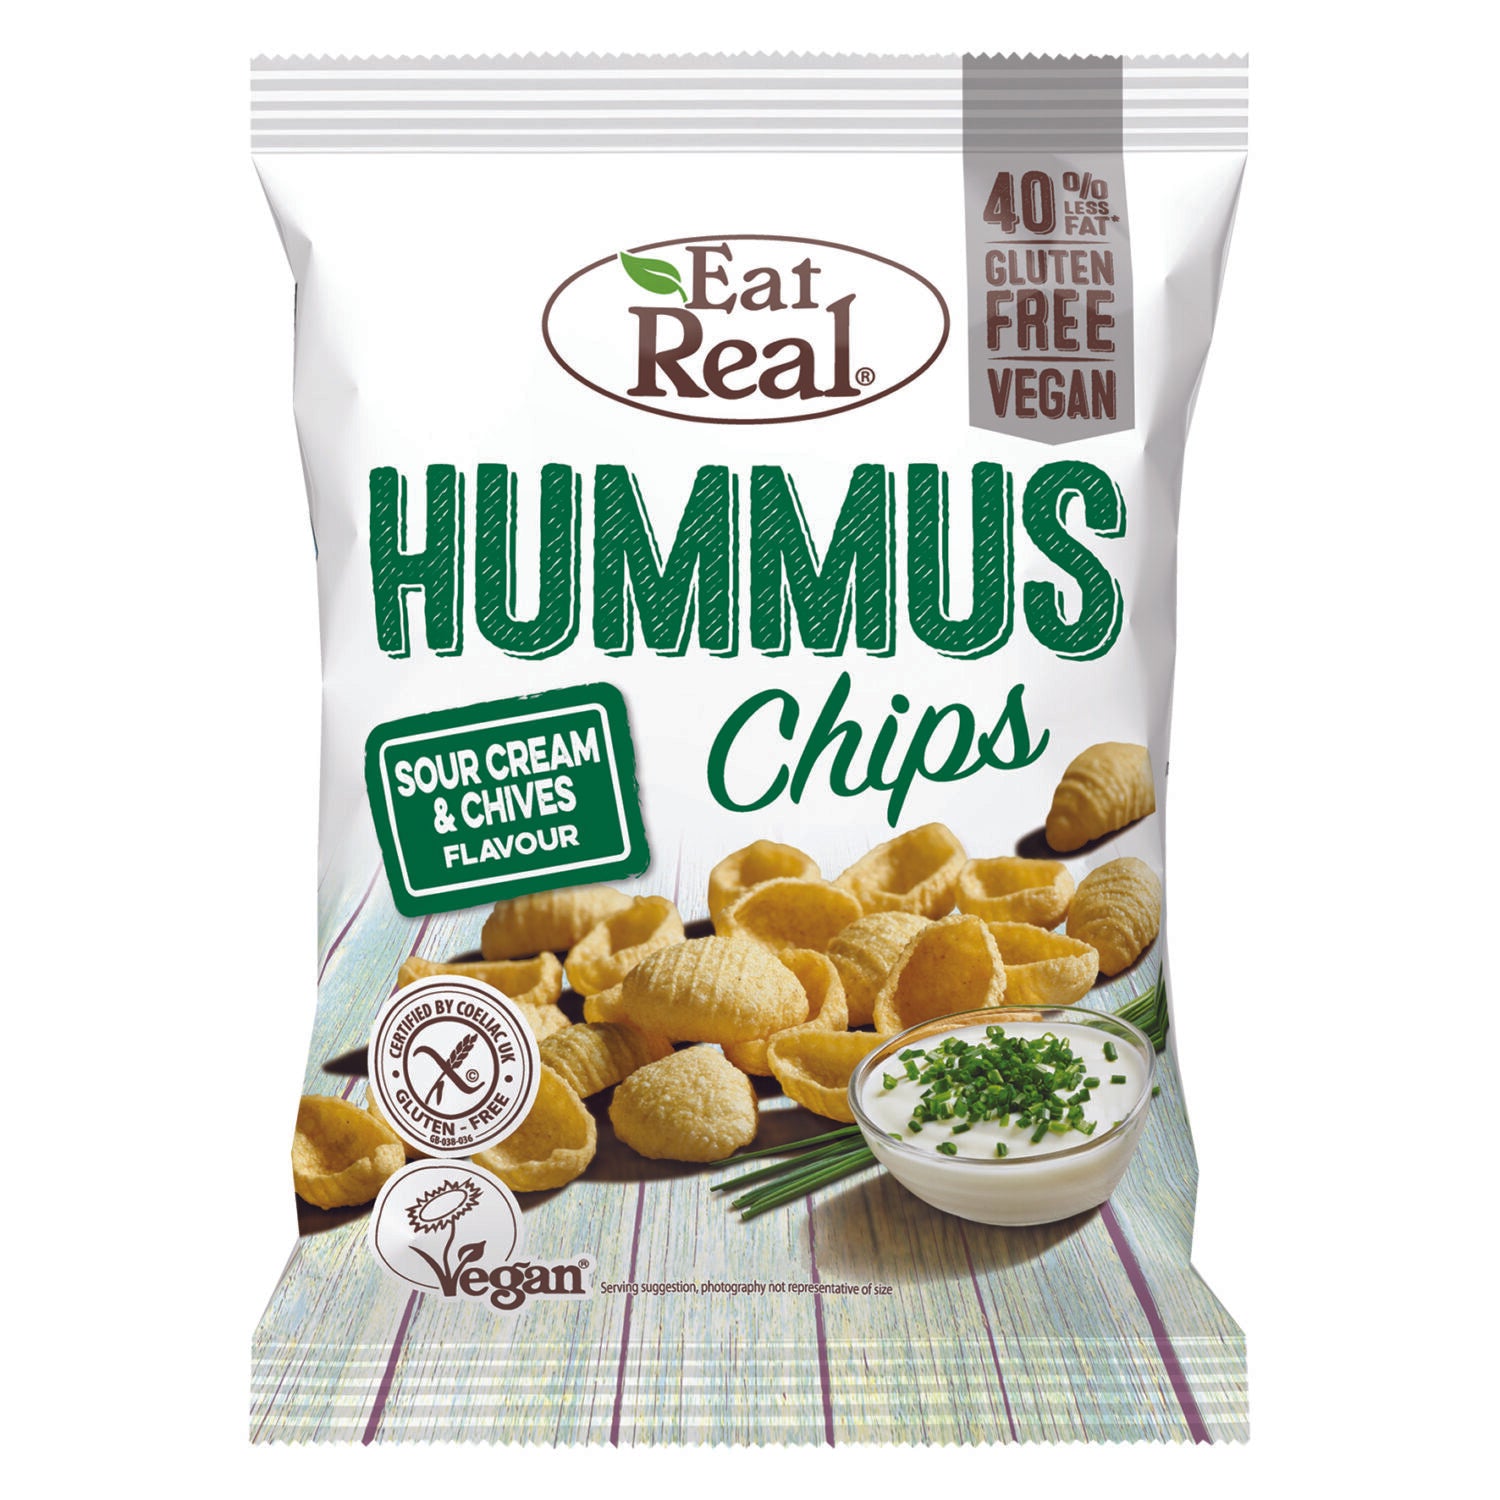 Eat Real Hummus Chips "Sour Cream &amp; Chives"